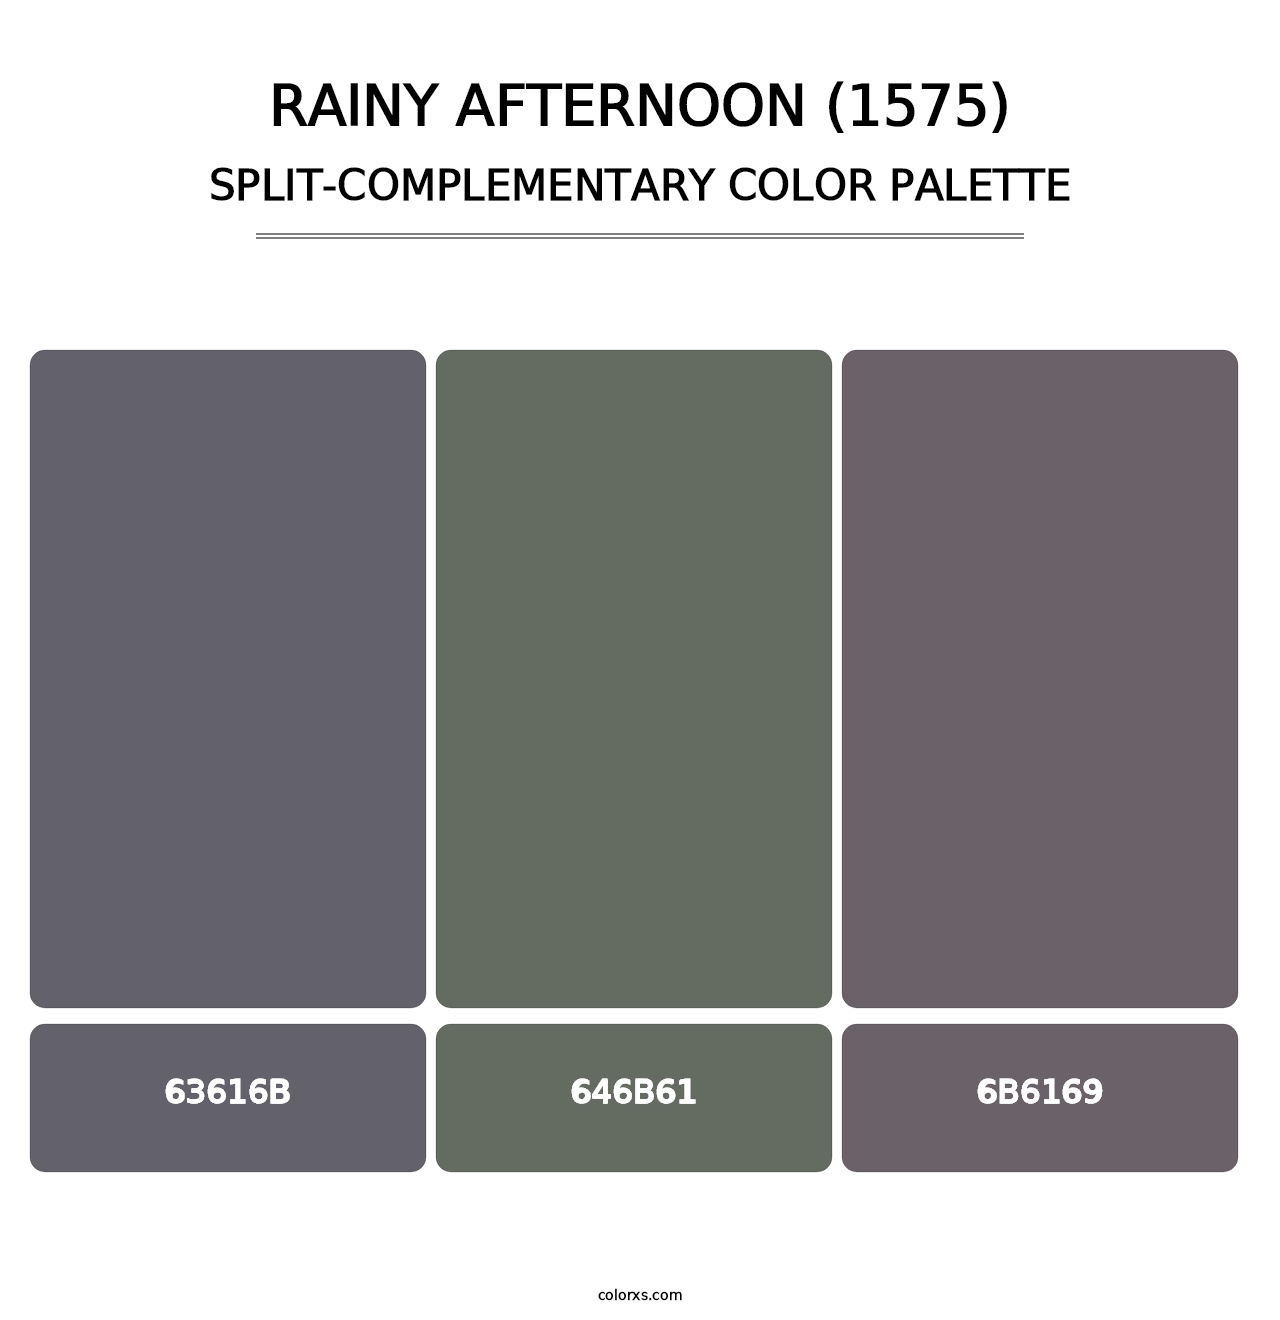 Rainy Afternoon (1575) - Split-Complementary Color Palette